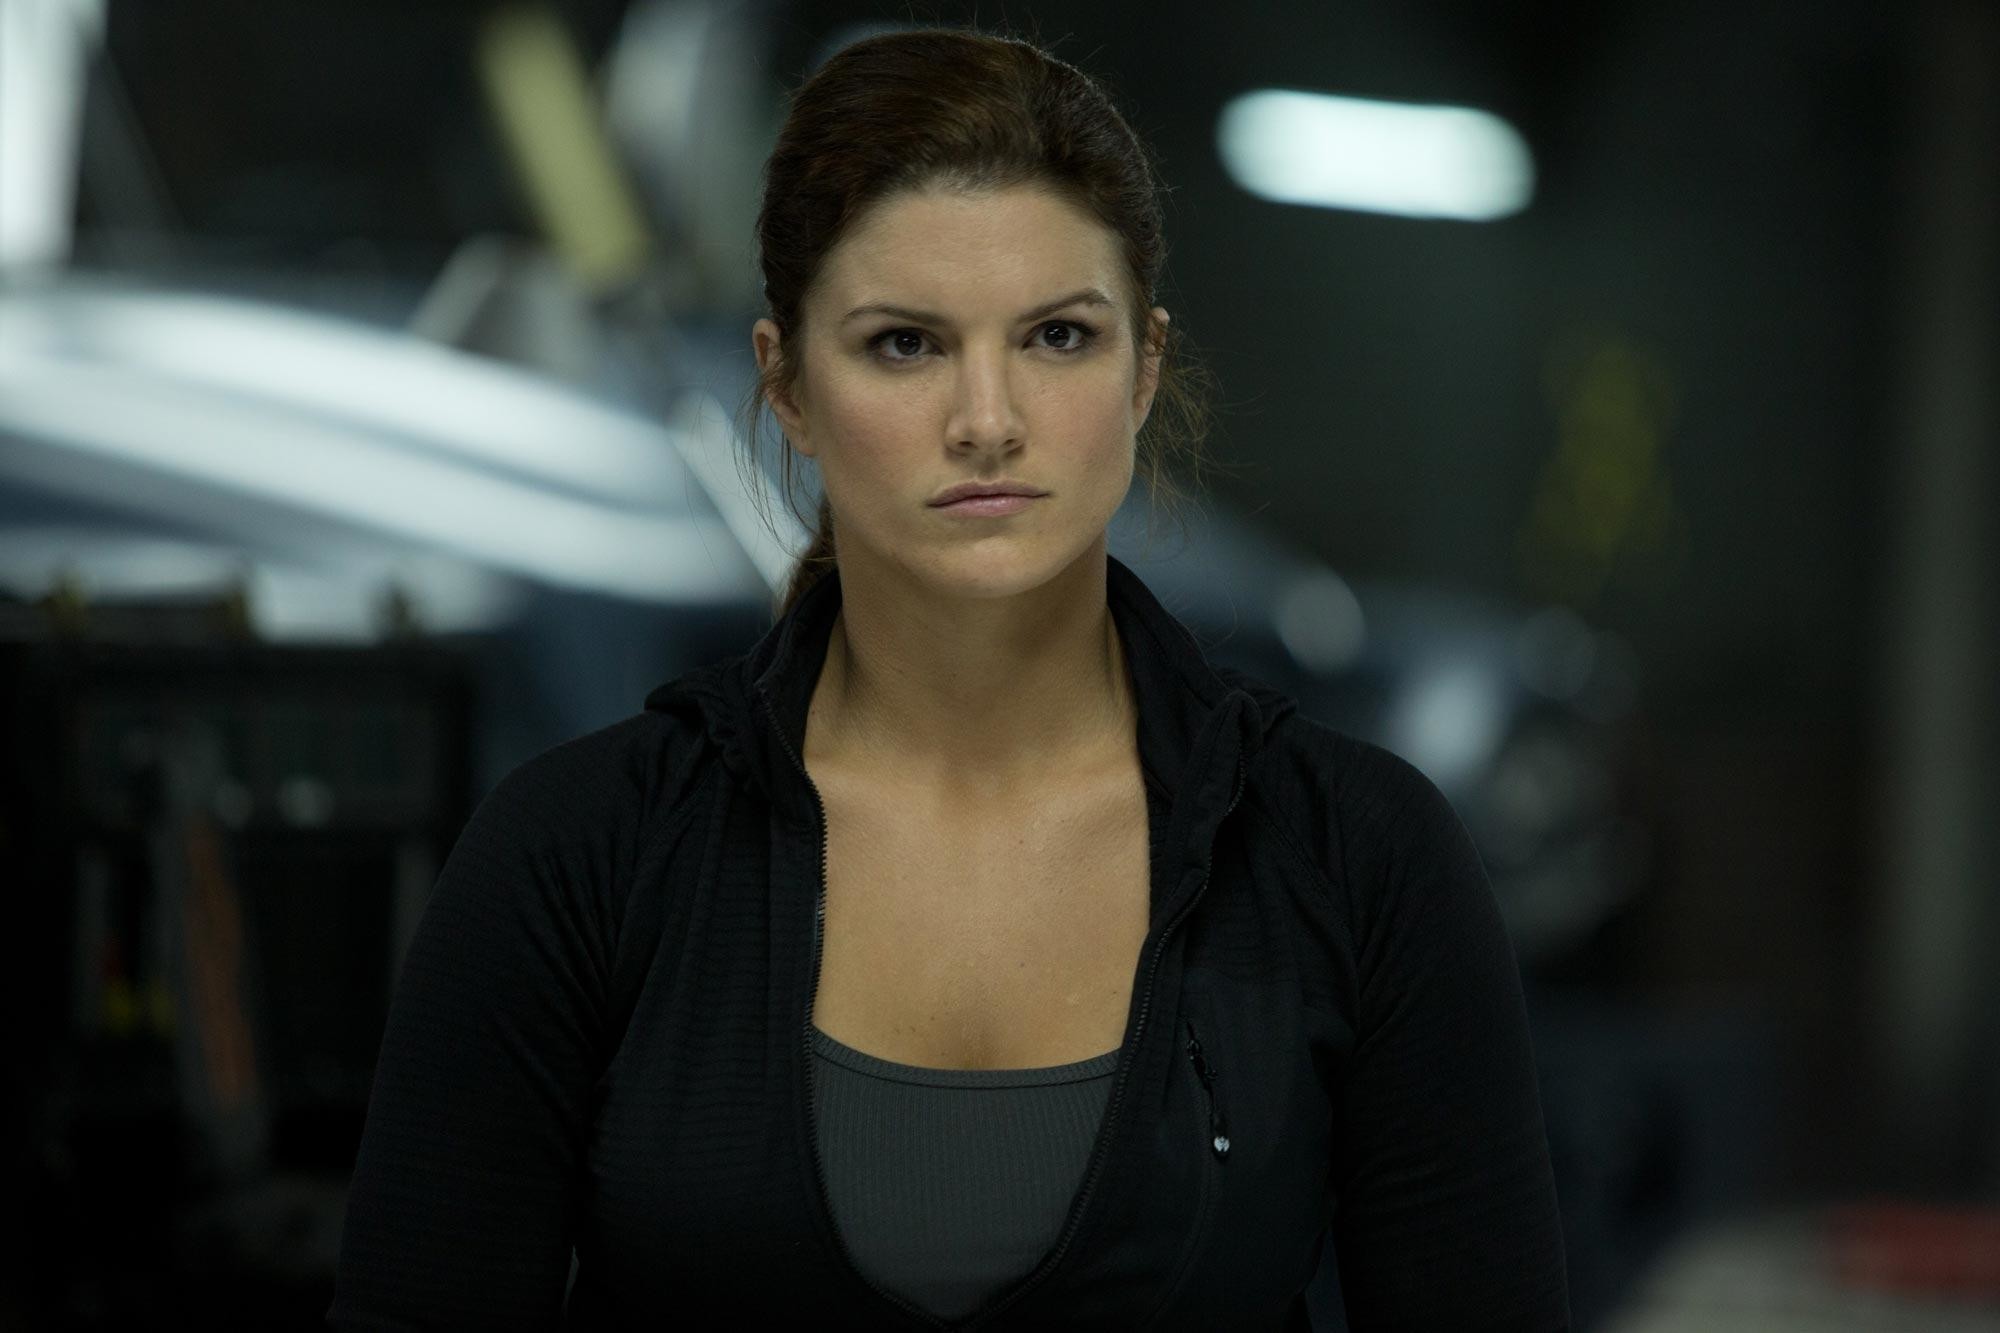 2000x1333 Gina Carano In Fast And Furious HD Desktop 1920 X 1080 Wallpapers .